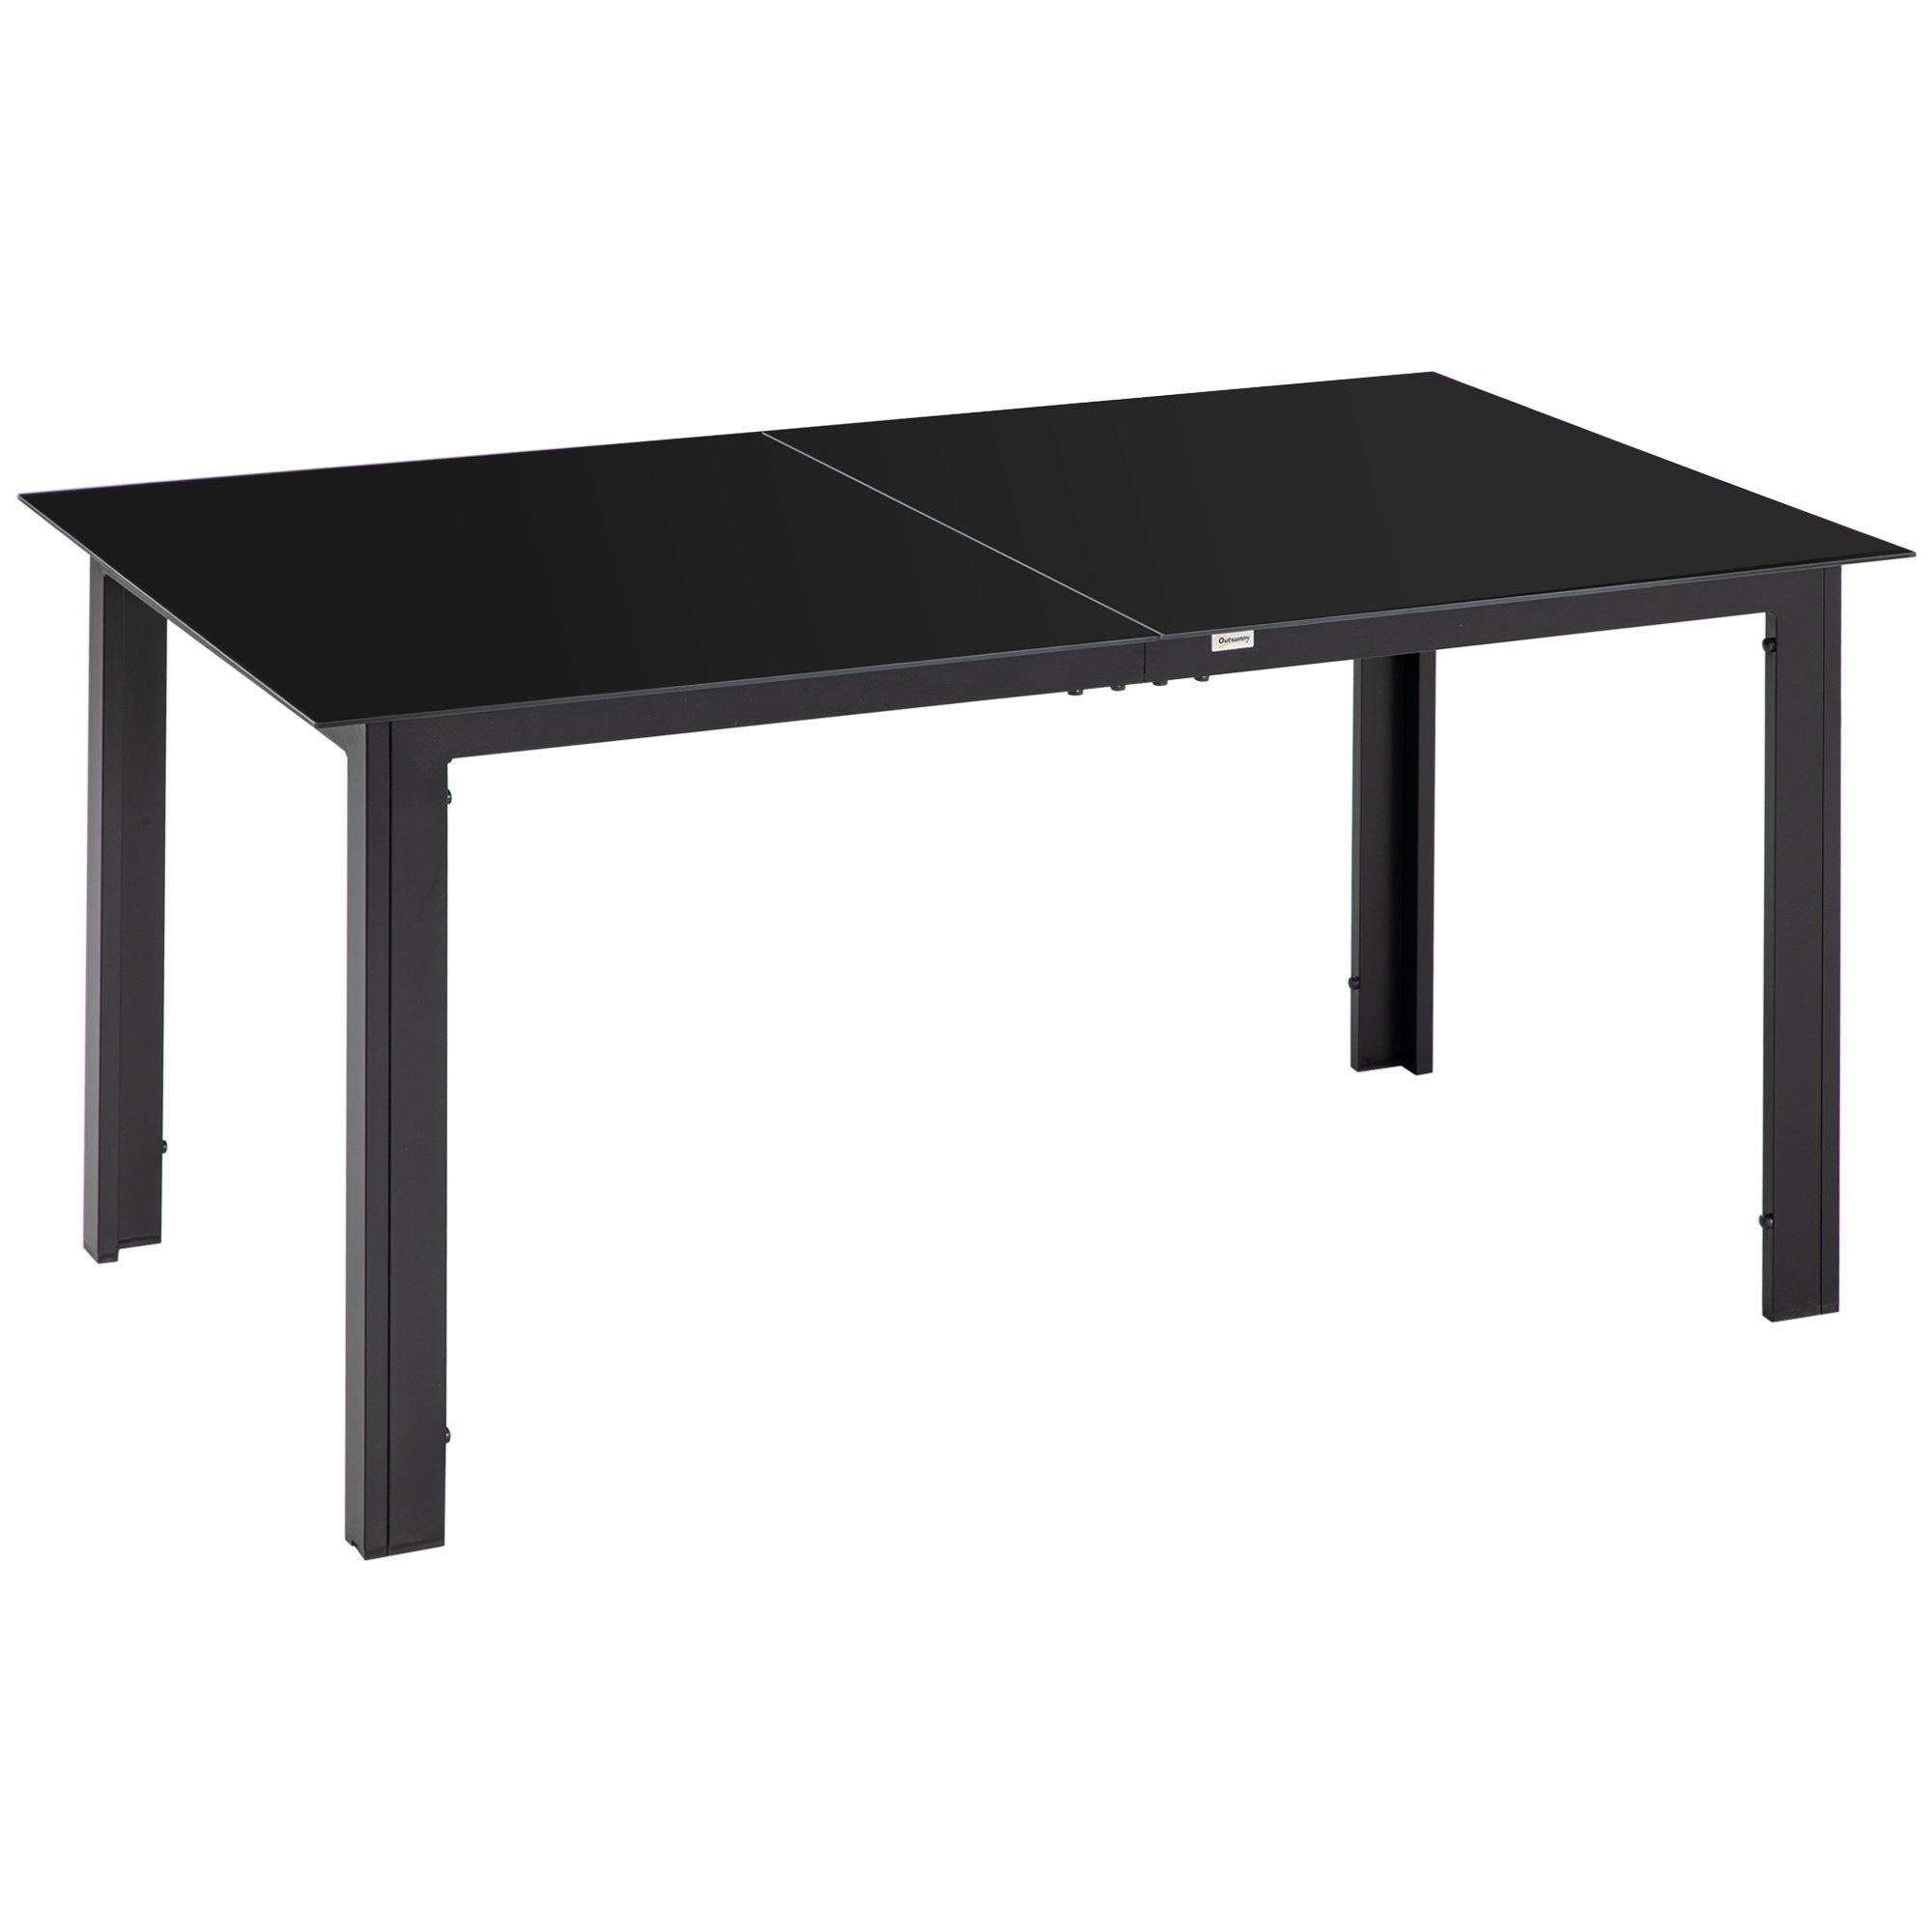 Outdoor Garden Table for 6, Outdoor Dining Table with Glass Top, Black